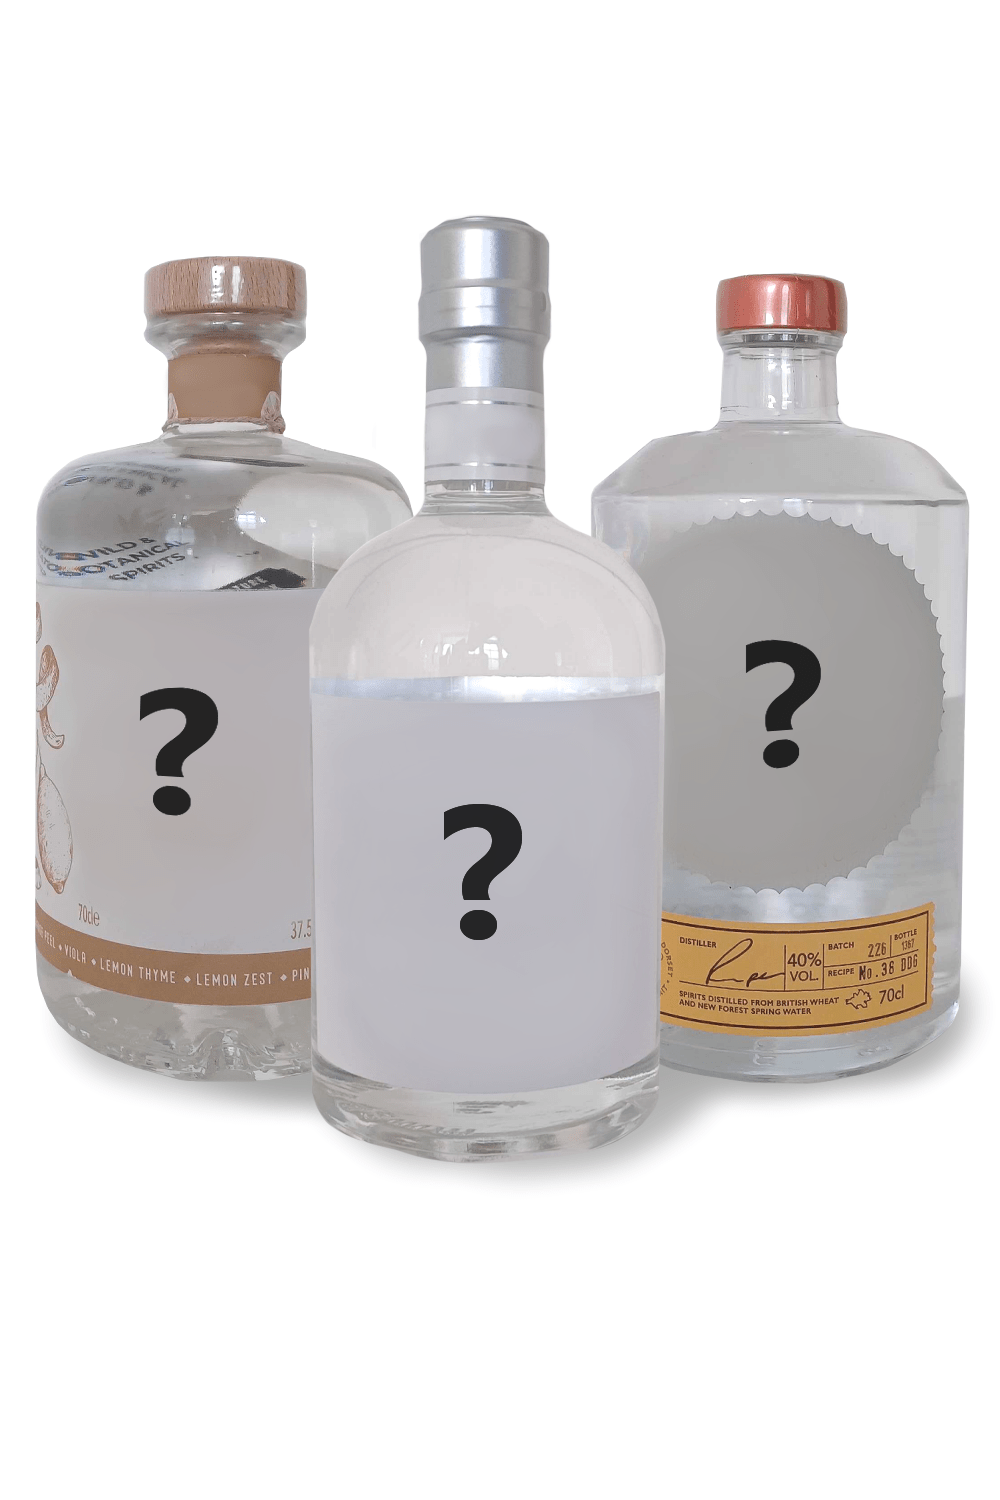 Novel Wines Mixed Case NEW - Mystery Gin Mixed Case - Three Bottle of Gin Mixed Case Offer